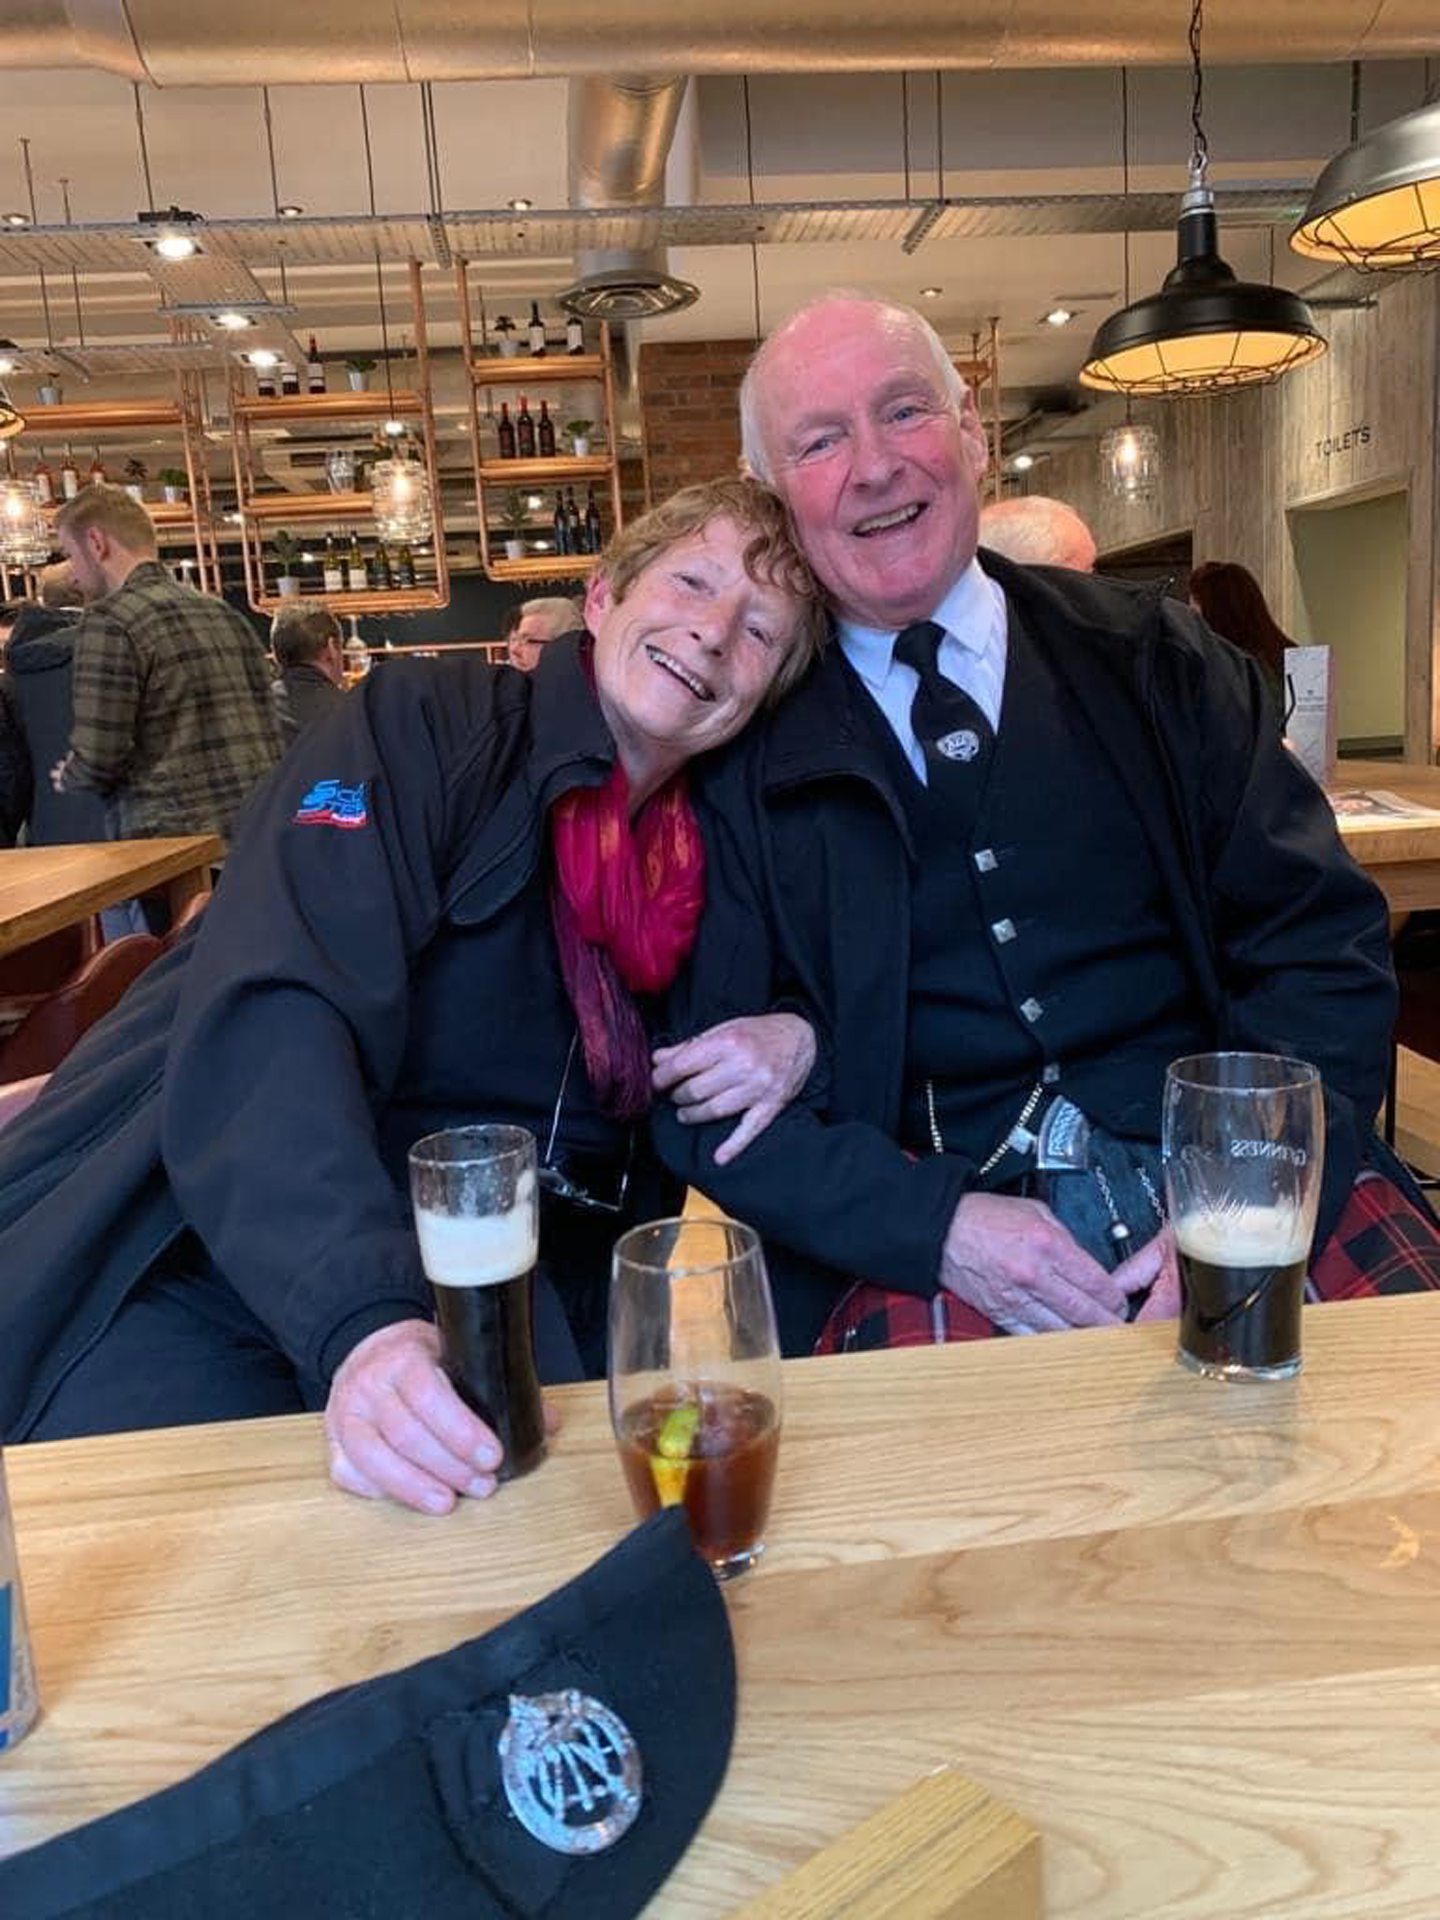 Sandy and his wife Glennis pictured relaxing on a pipe band tour of Ireland.